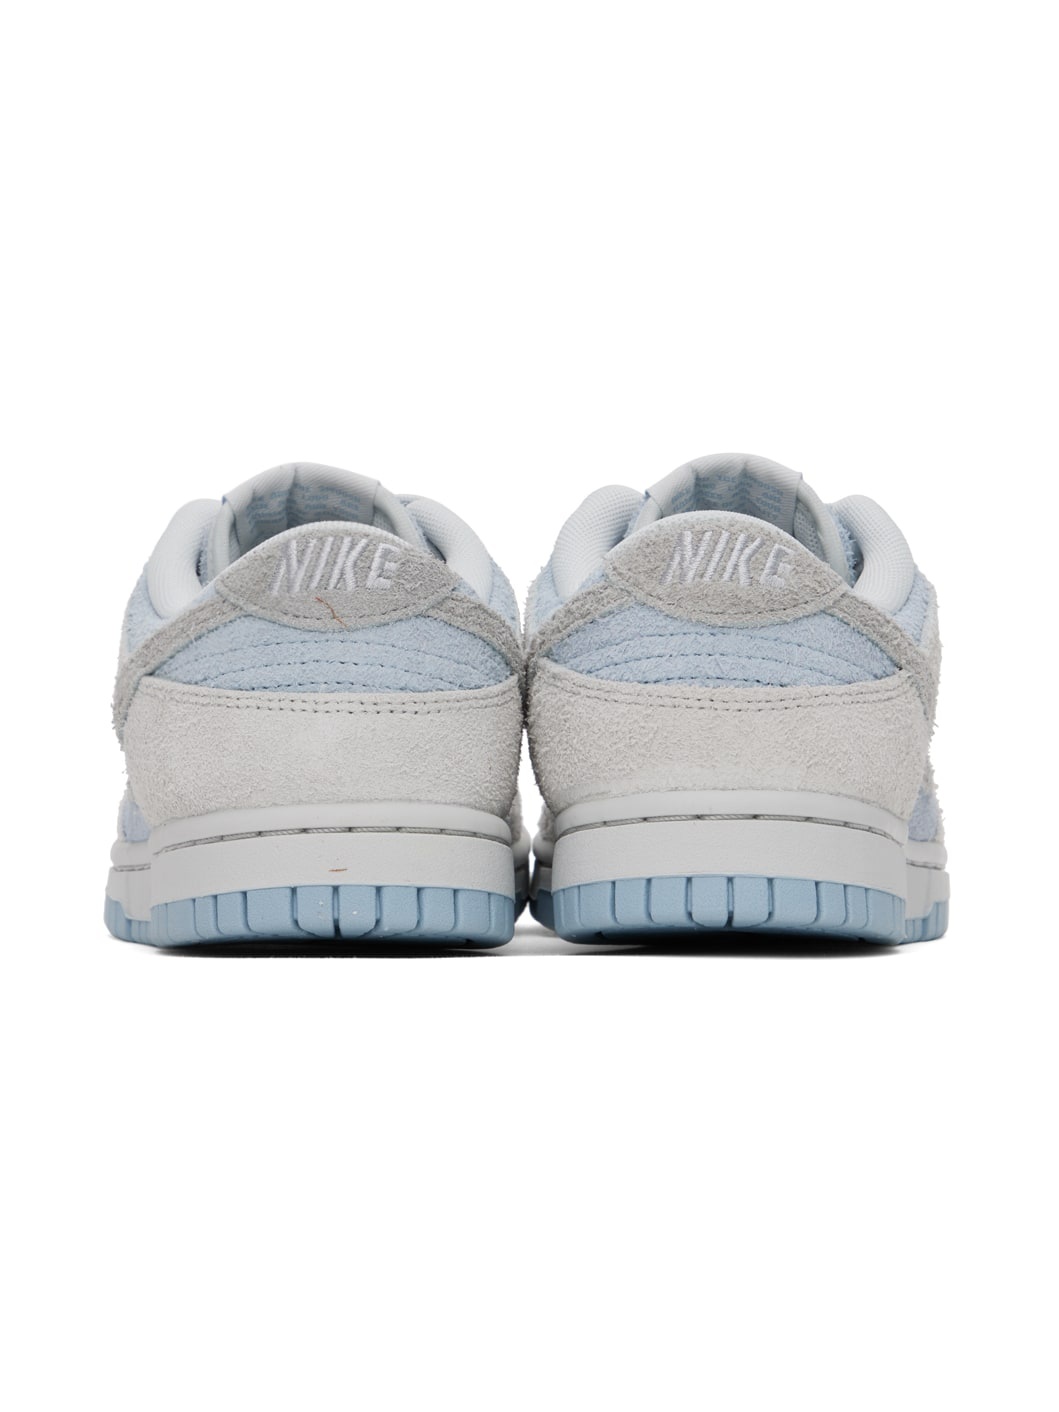 Blue & Gray Dunk Low Sneakers - 2